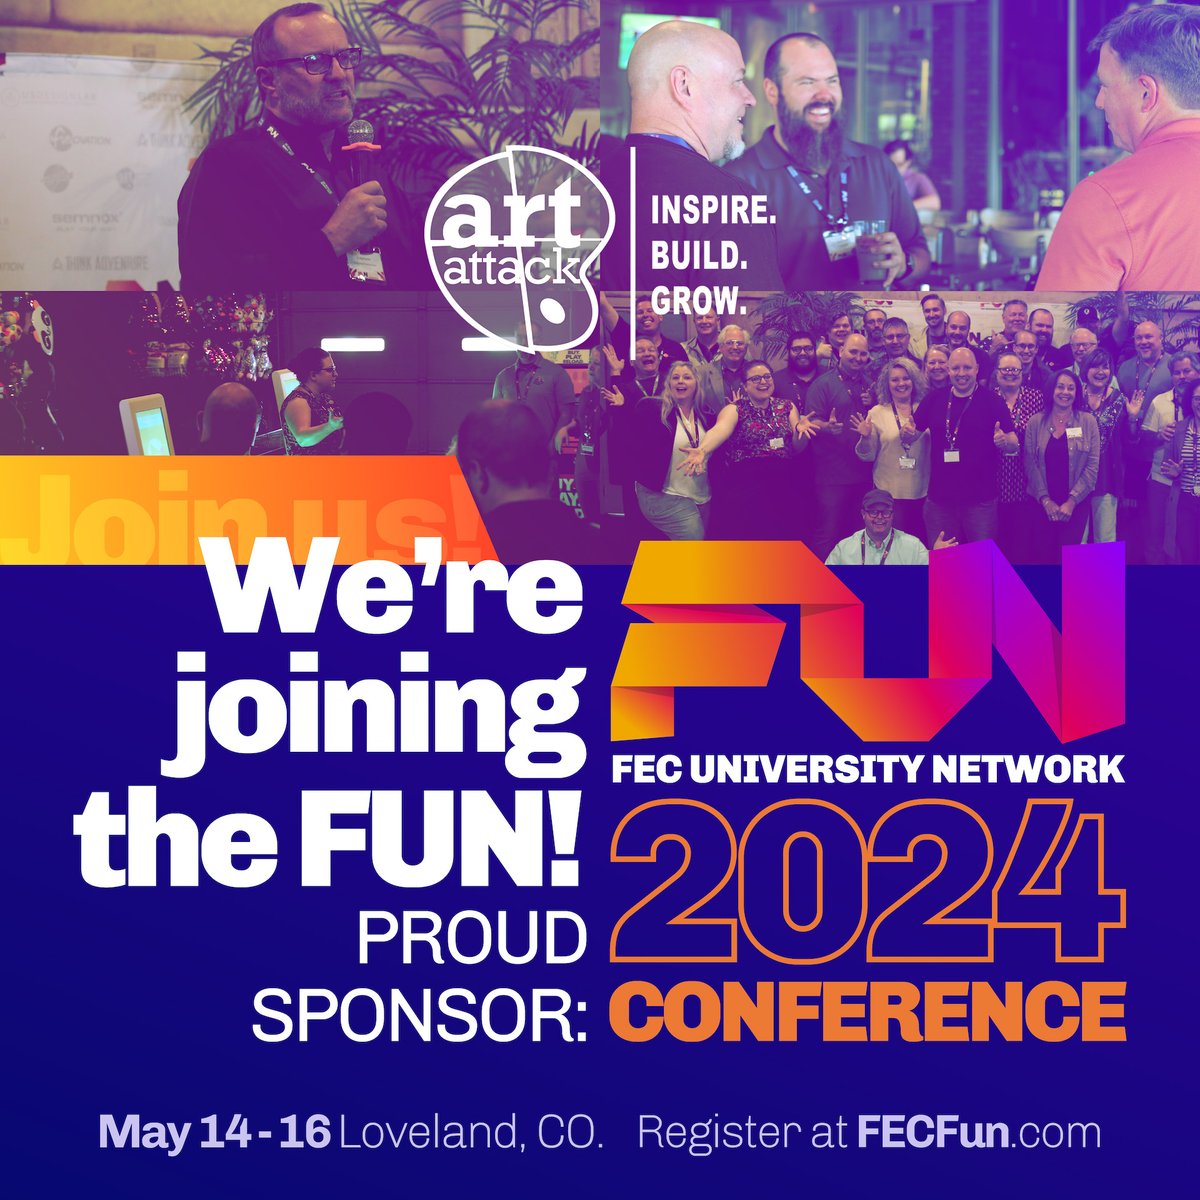 Art Attack is proud to be sponsoring and attending the FUN 2024 Conference in Loveland, Colorado, from May 14-16th! Connecting with like-minded individuals and learning from industry leaders is always so much FUN! #InspireBuildGrow #FECFUN #FUN2024 #Loveland #Colorado #Conference